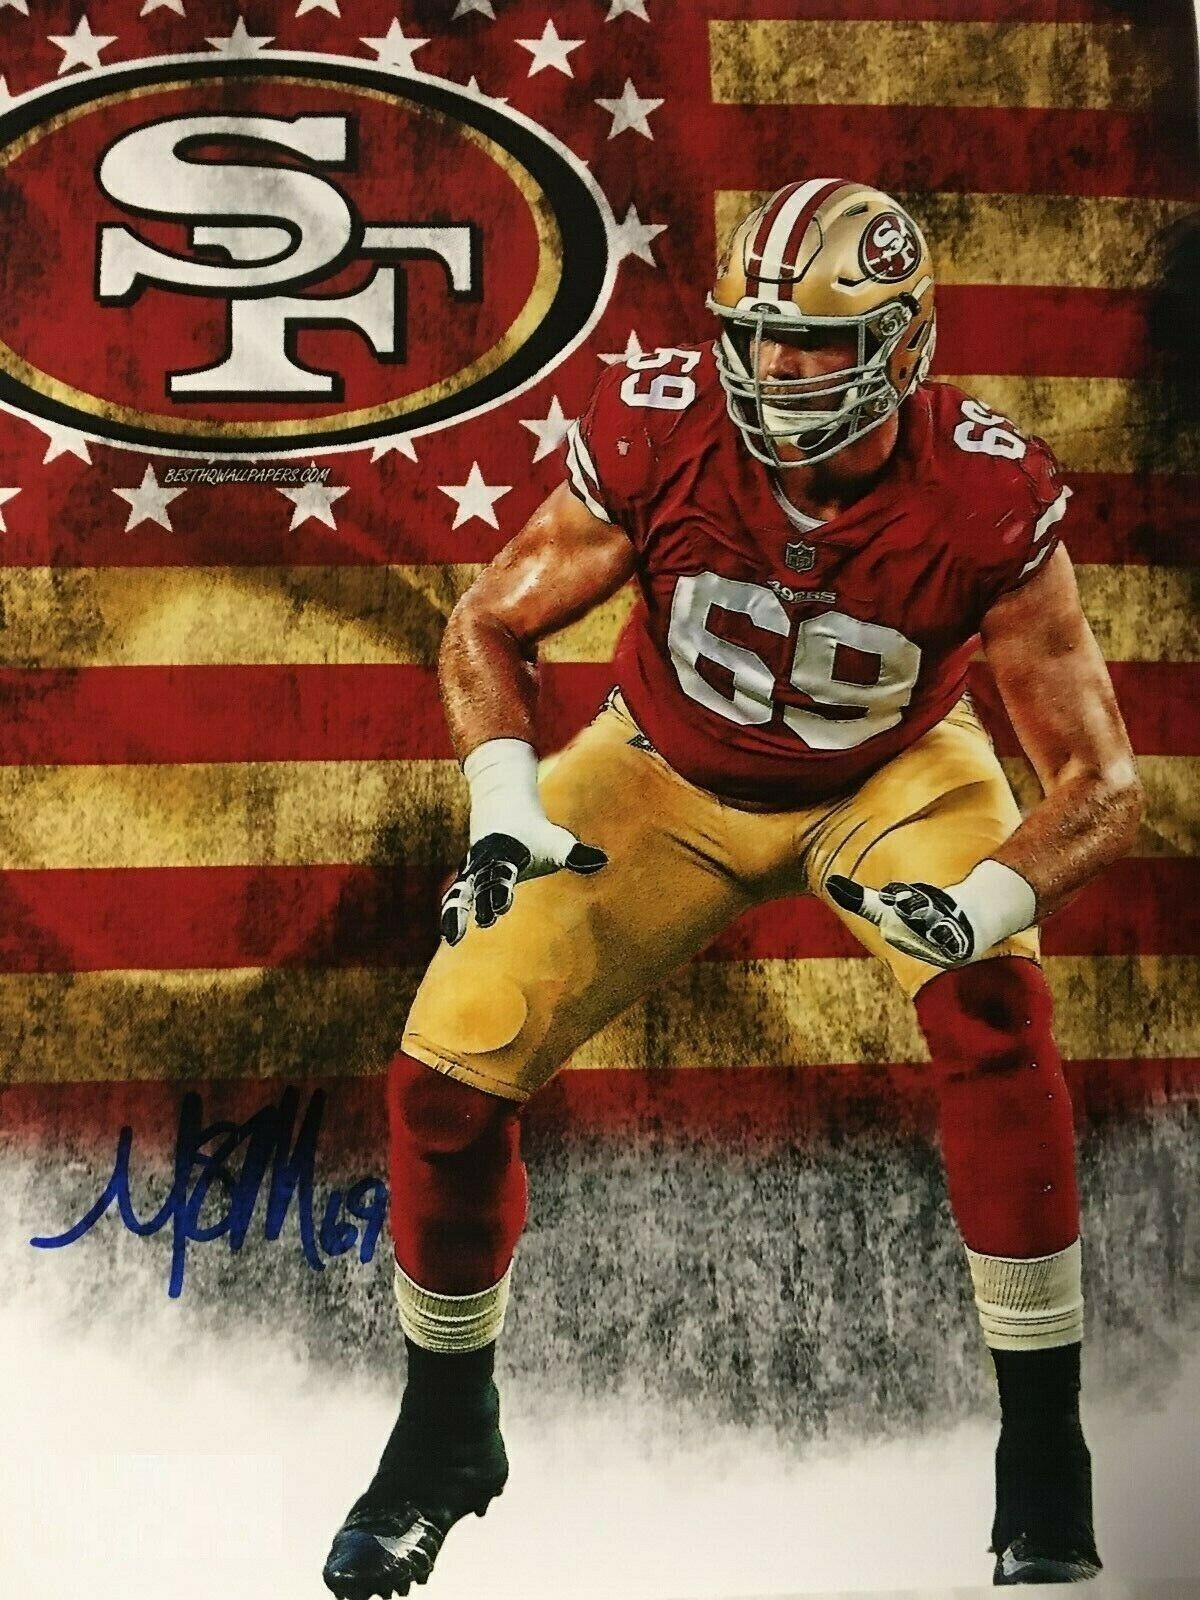 Mike McGlinchey Autographed Signed 8x10 Photo Poster painting ( 49ers ) REPRINT